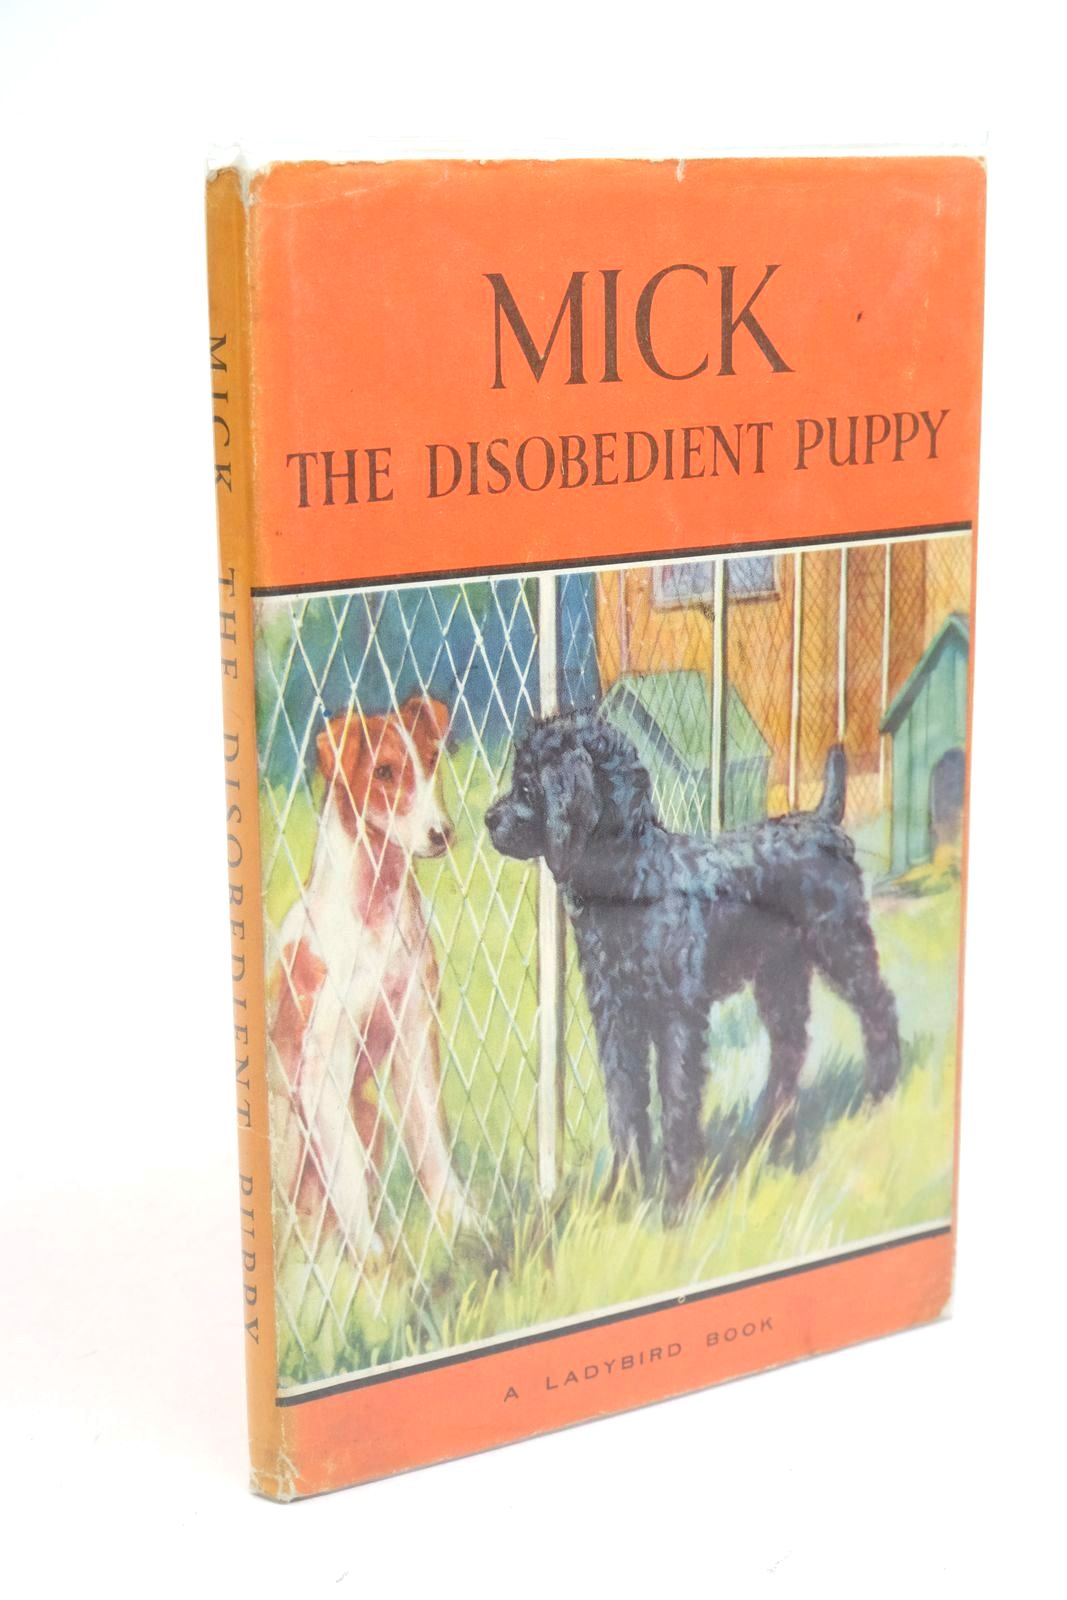 Photo of MICK THE DISOBEDIENT PUPPY written by Barr, Noel illustrated by Hickling, P.B. published by Wills &amp; Hepworth Ltd. (STOCK CODE: 1322394)  for sale by Stella & Rose's Books